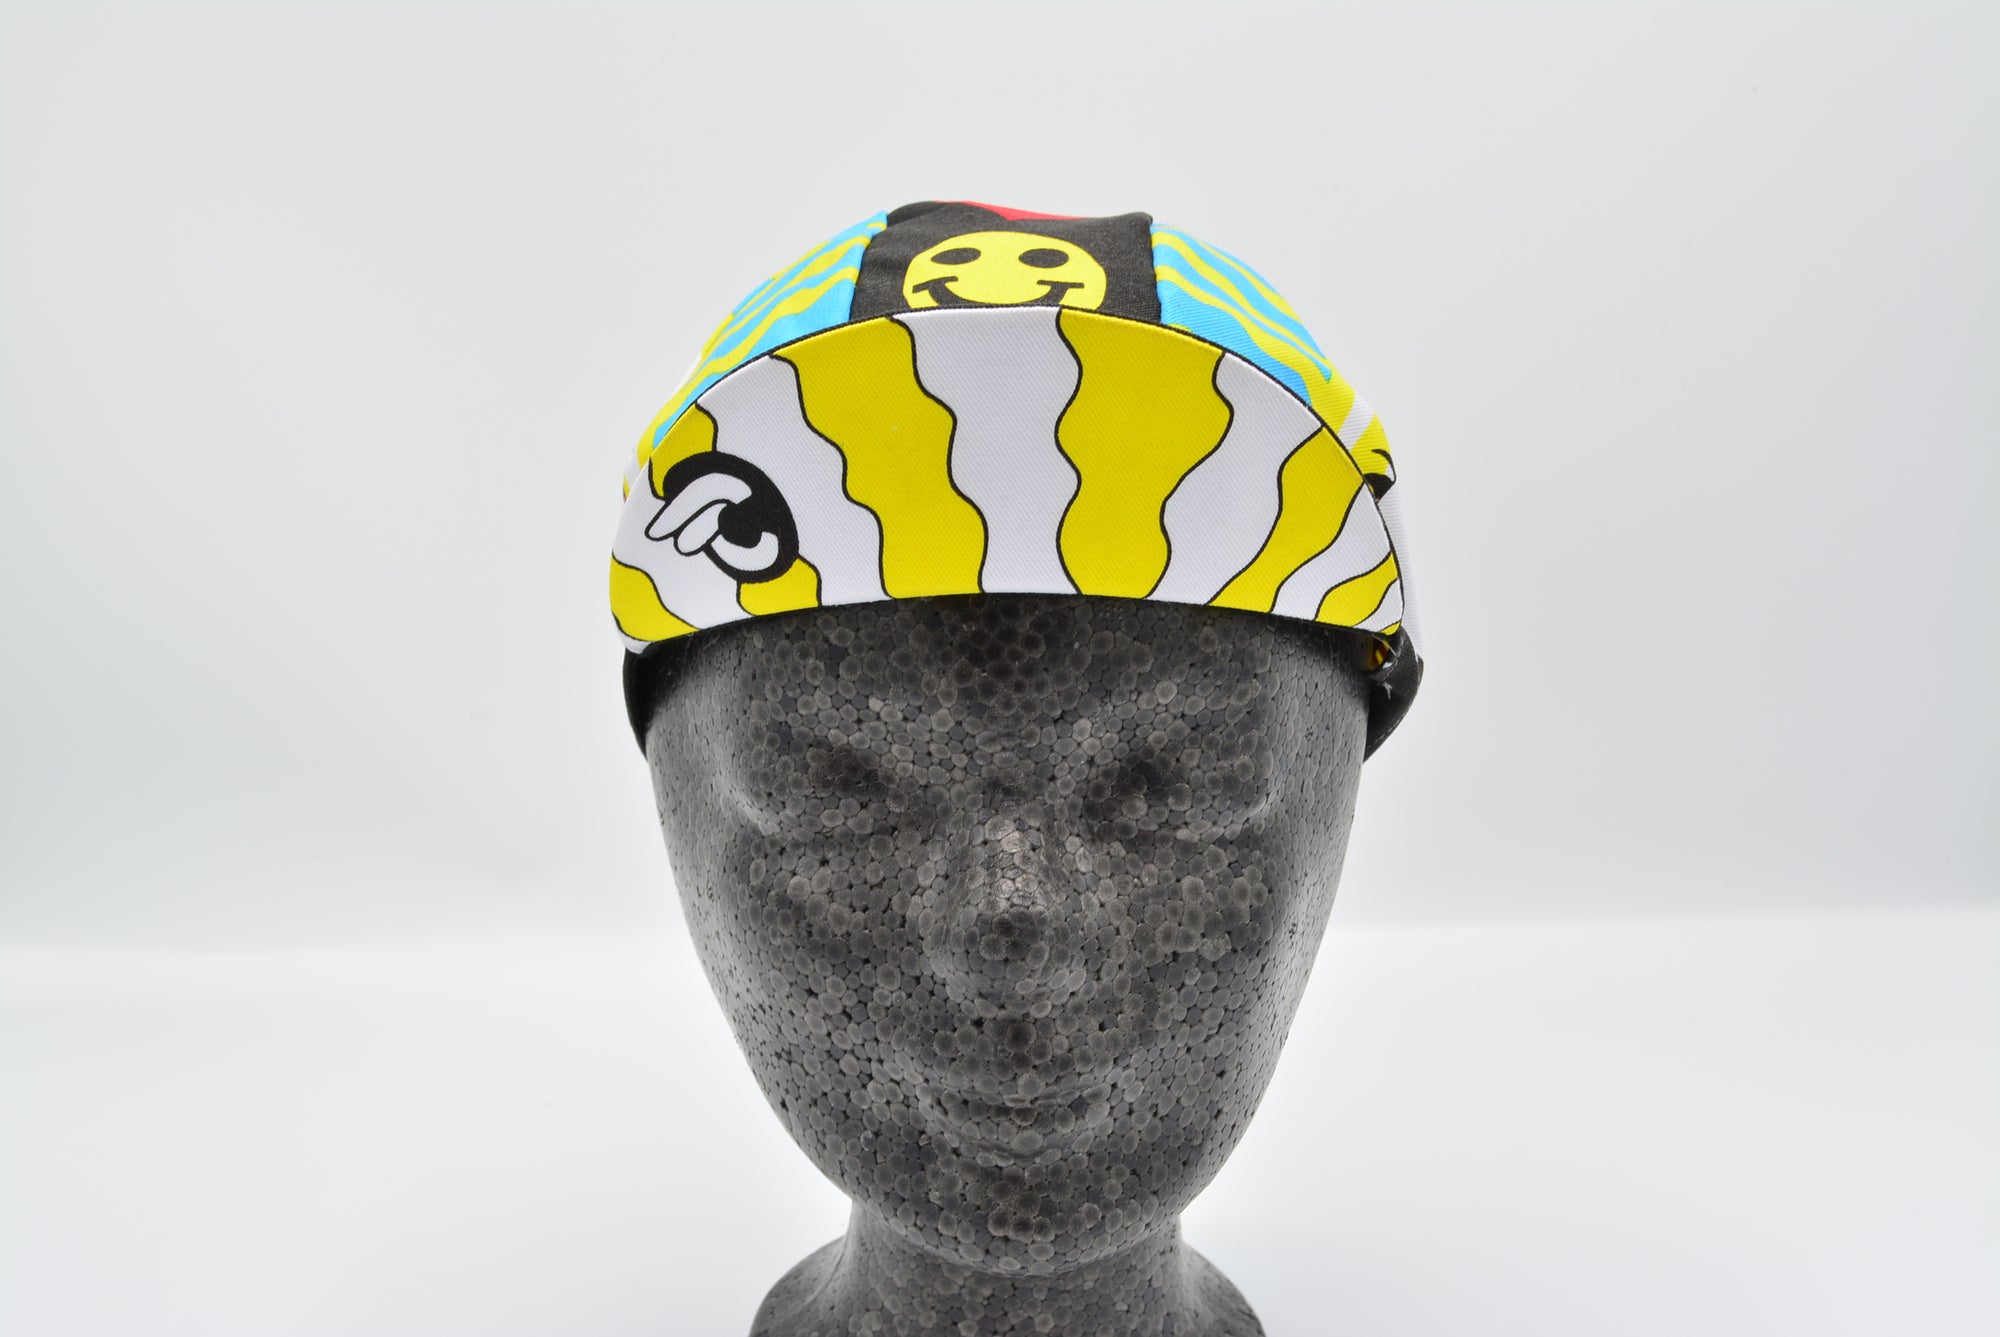 Cinelle Eye of the Storm Cycle Cap